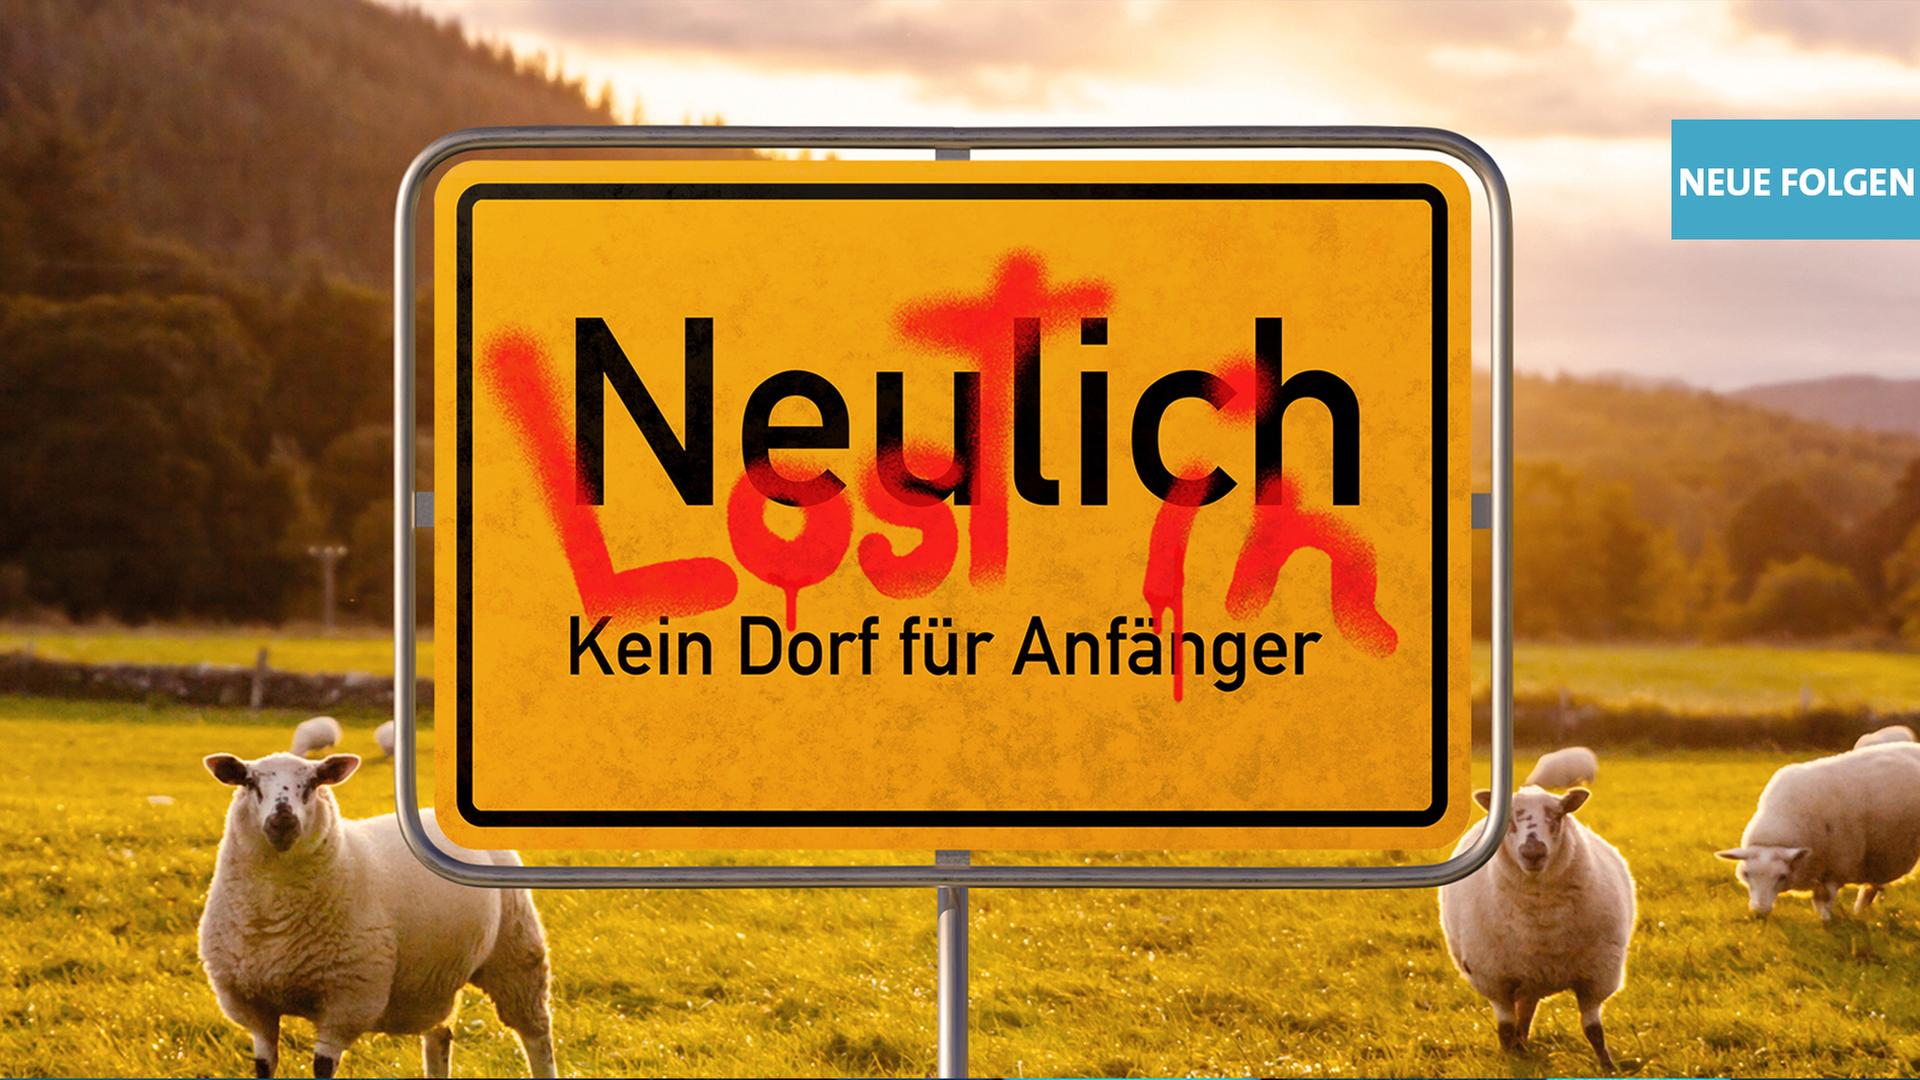 Lost in Neulich - Neue Folge